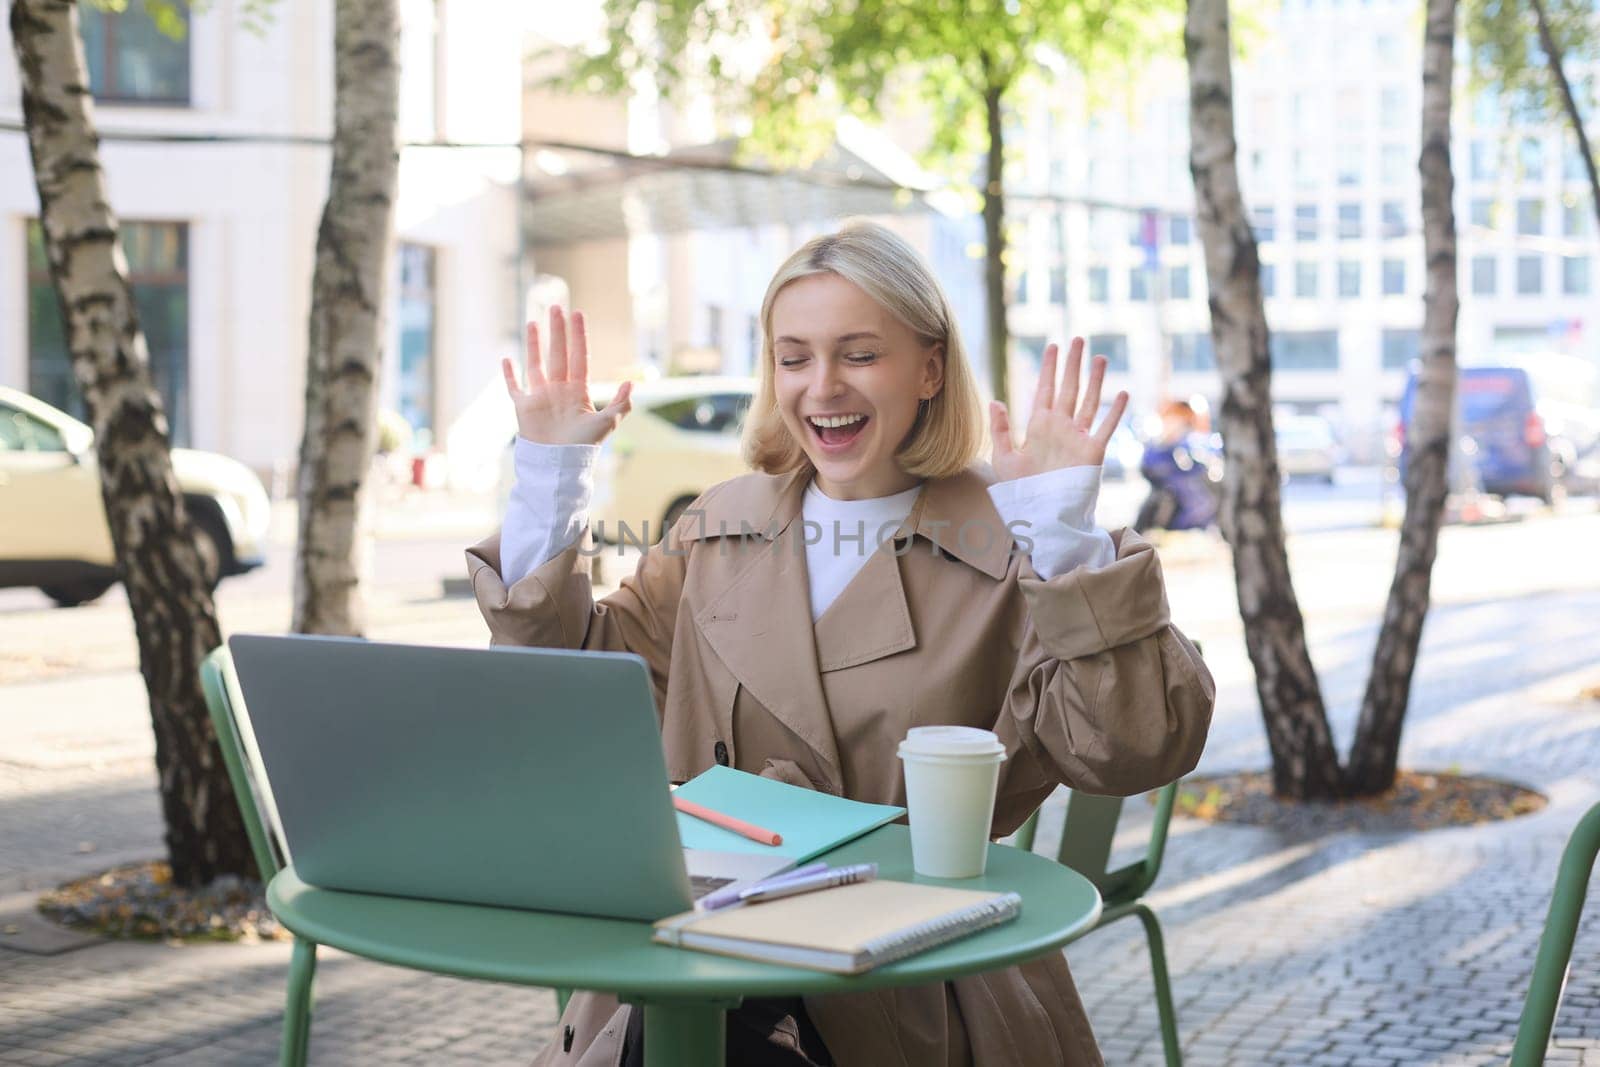 Enthusiastic young woman, carefree girl celebrating, sitting in outdoor cafe with laptop, raising hands up and laughing, triumphing.